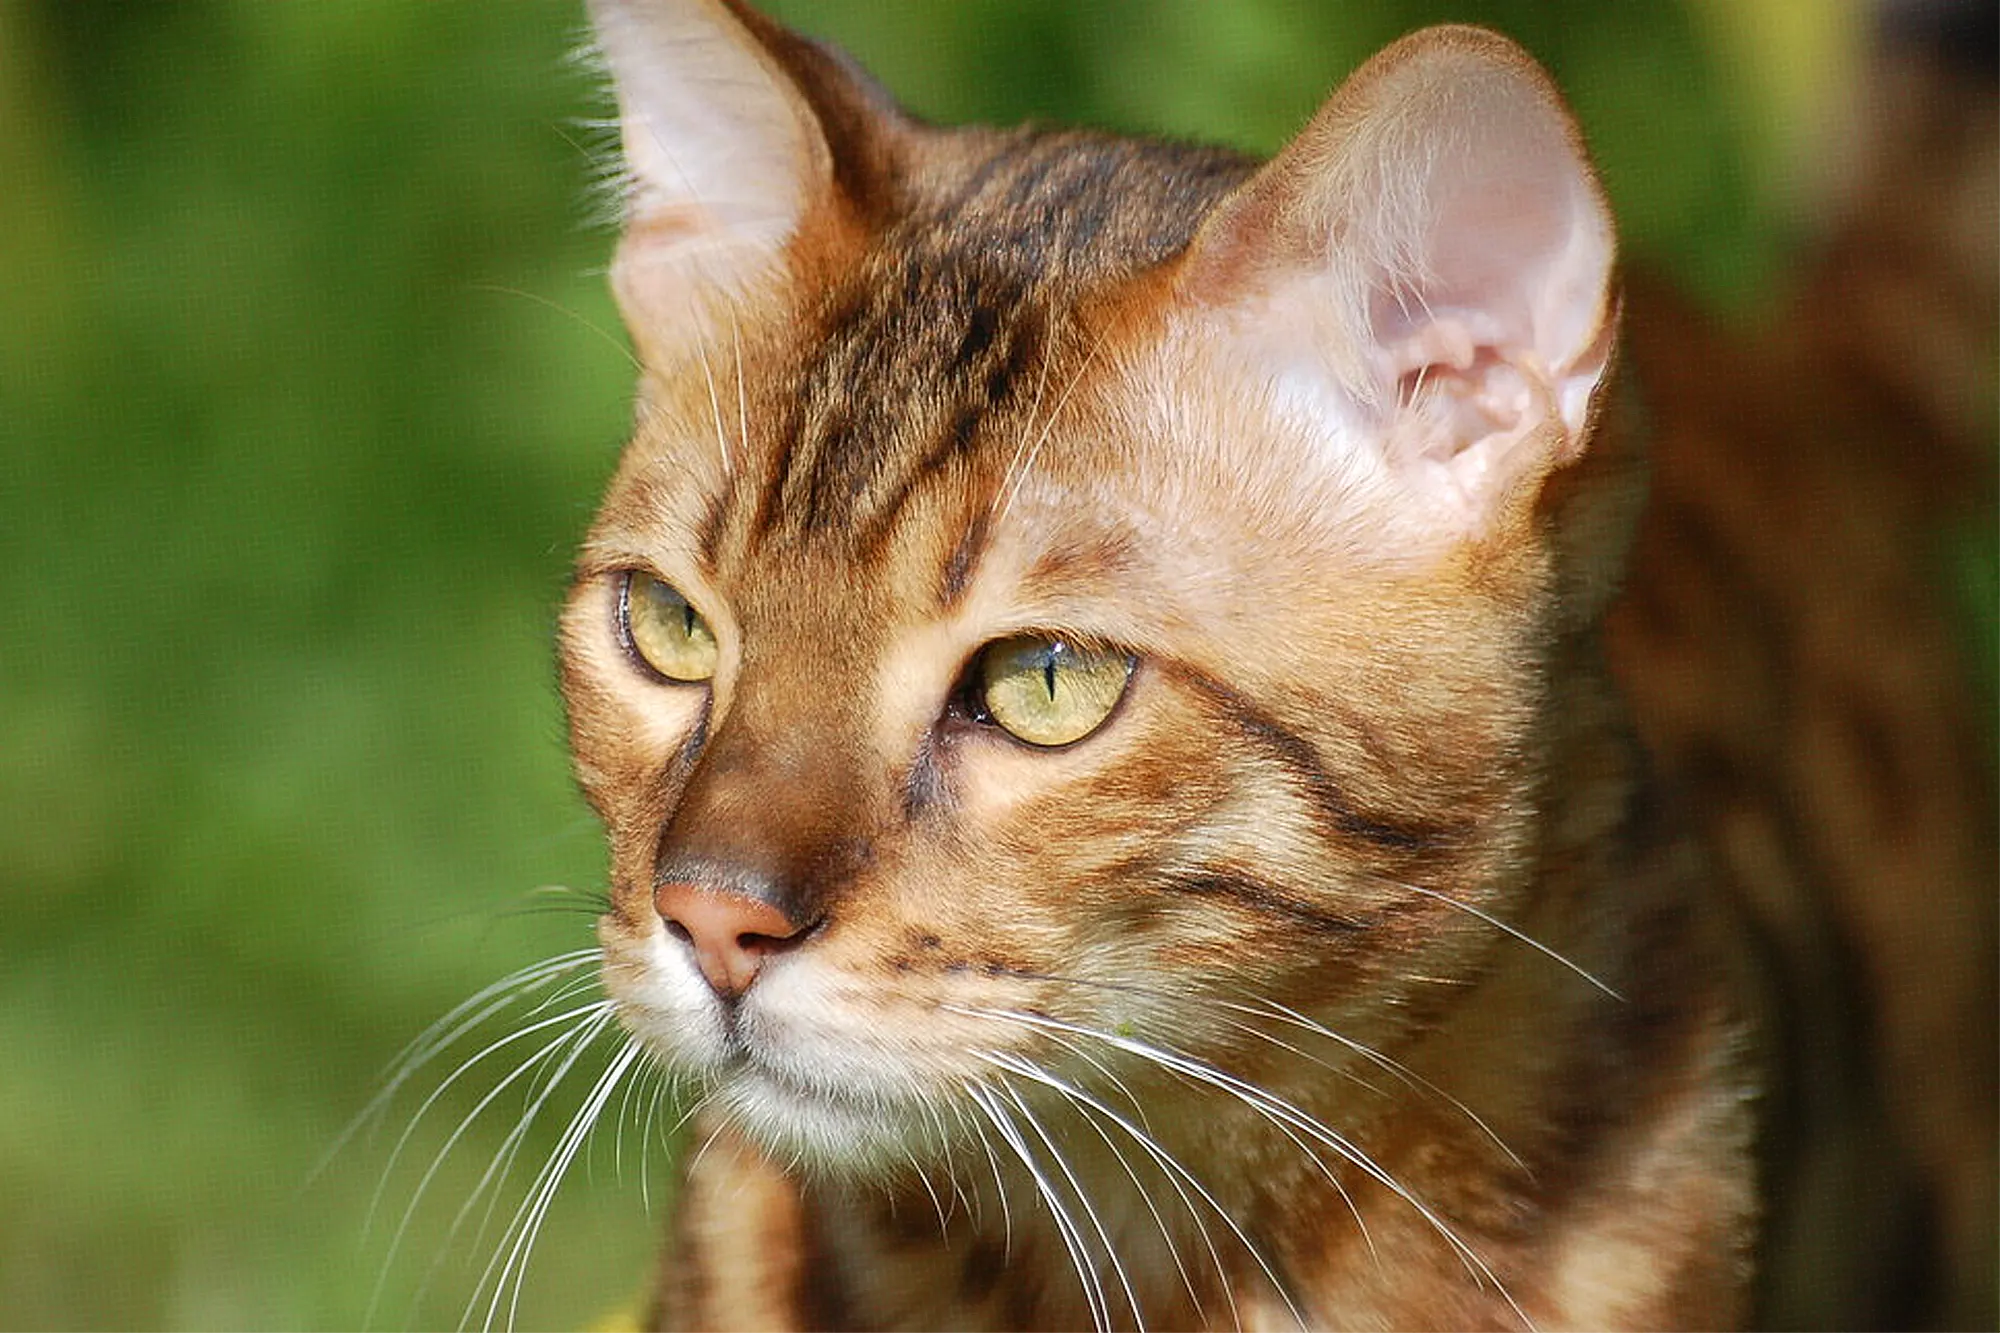 A Comprehensive Study of Bengal Cats: Profile, Personality, Lifestyle & More